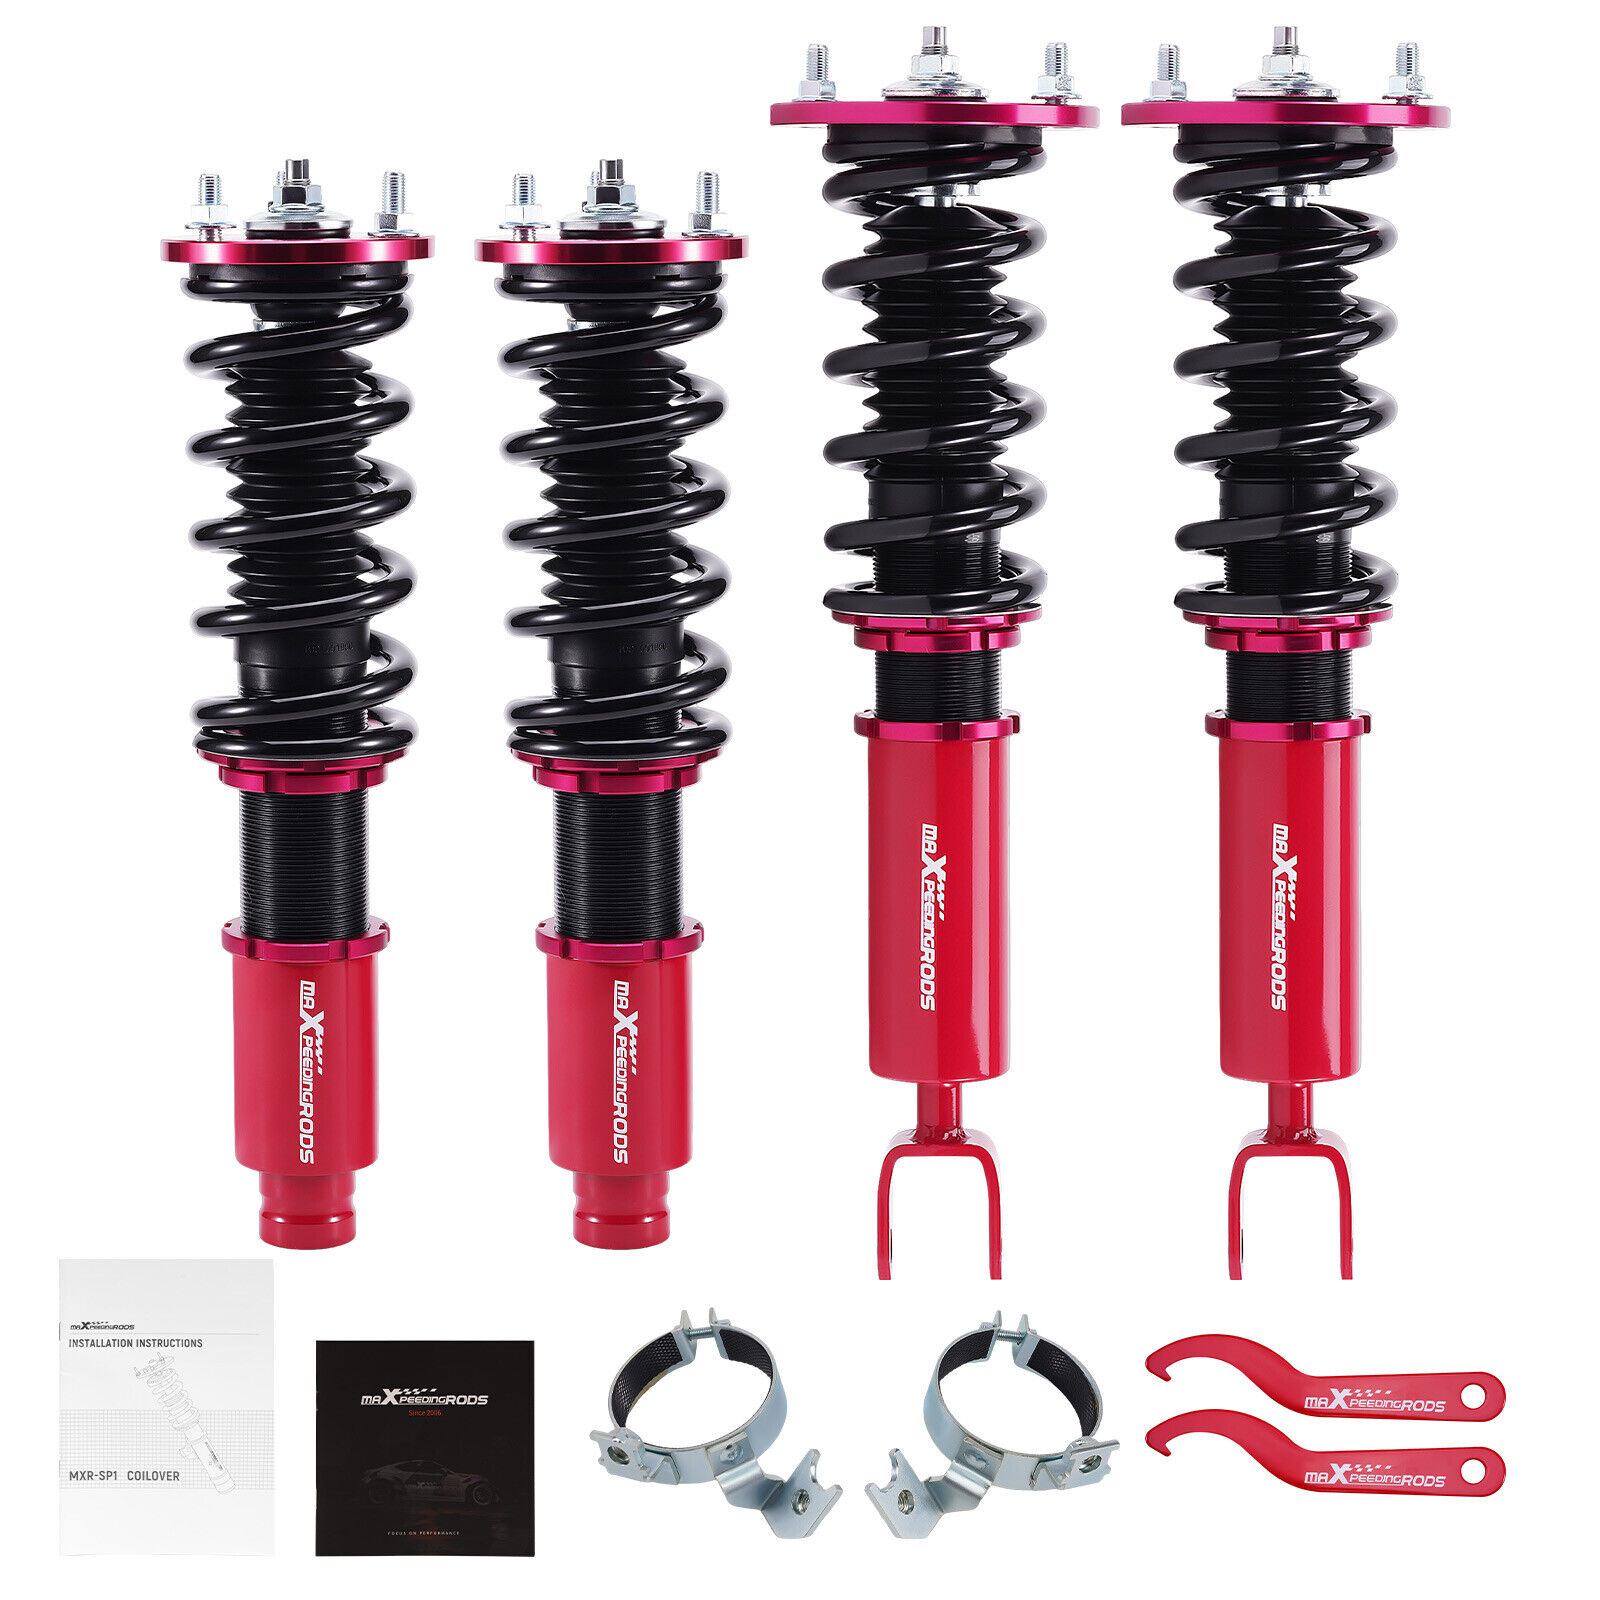 MaXpeedingrods Coilover Lowering Kit For Honda Accord 90-97 Height Adjustable